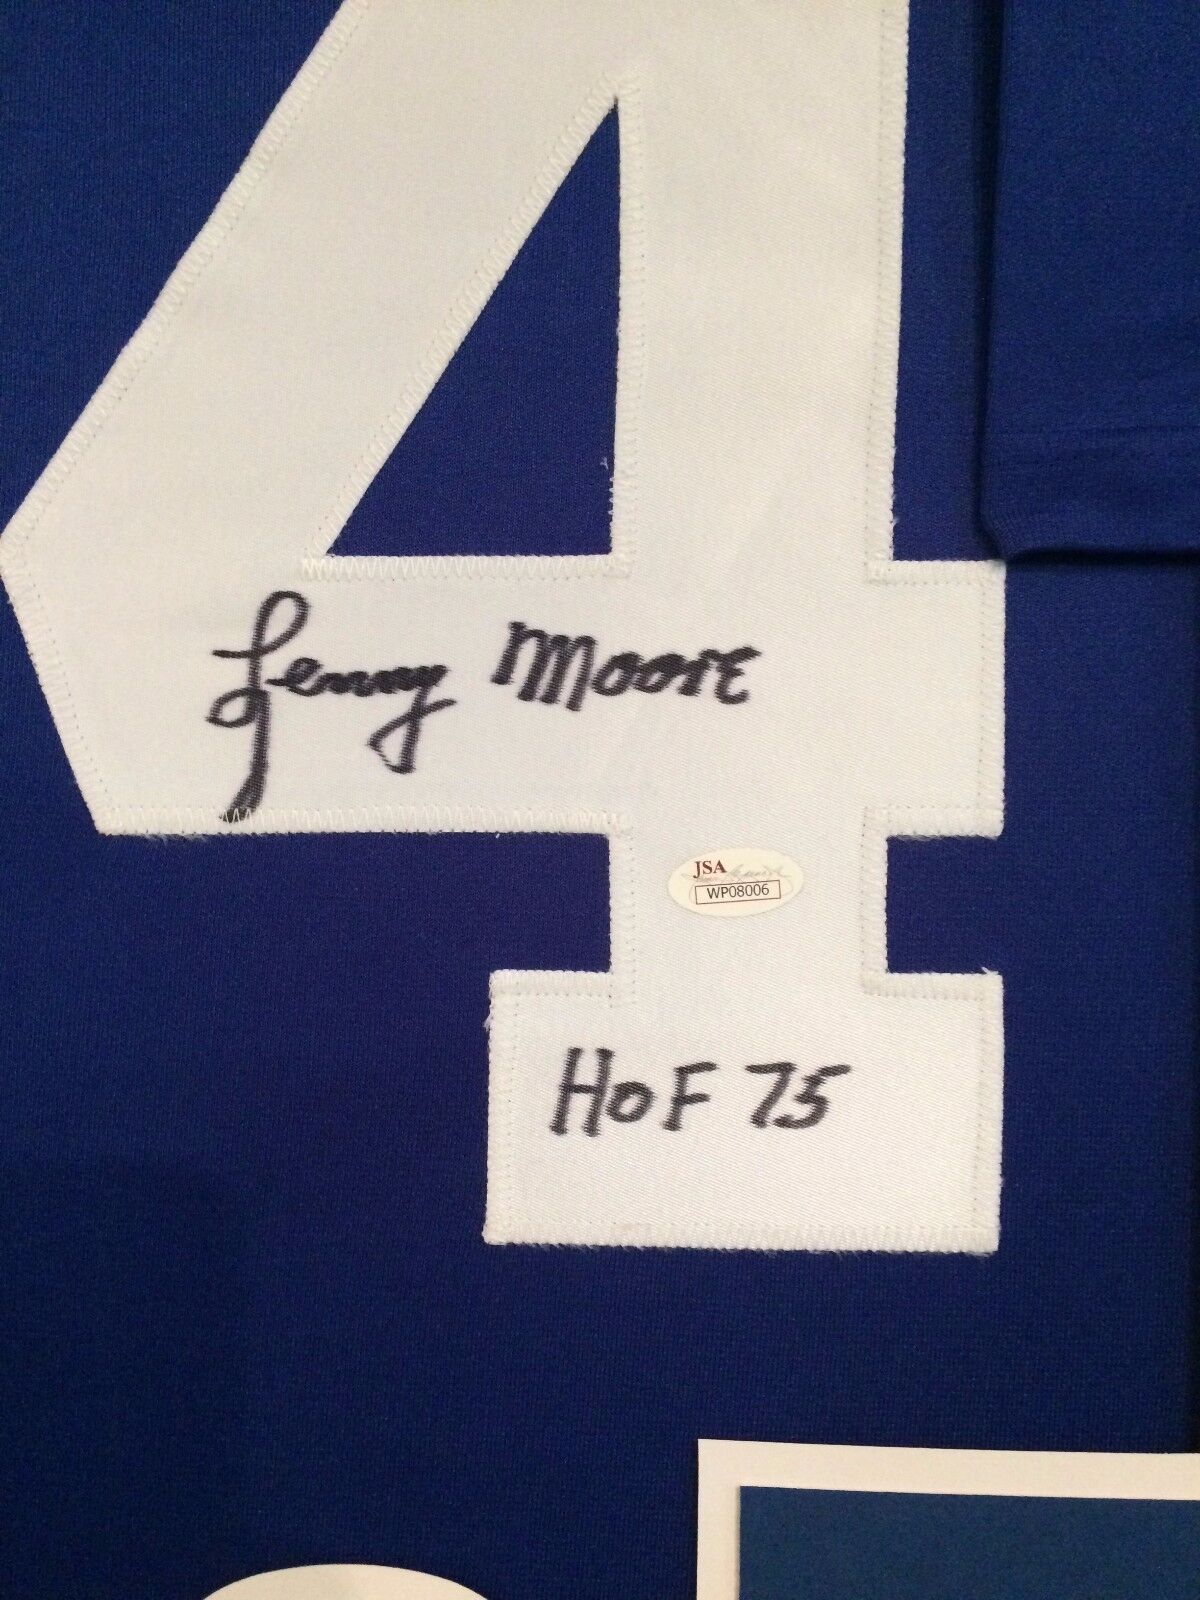 MVP Authentics Framed Lenny Moore Autographed Signed Inscribed Baltimore Colts Jersey Jsa Coa 360 sports jersey framing , jersey framing